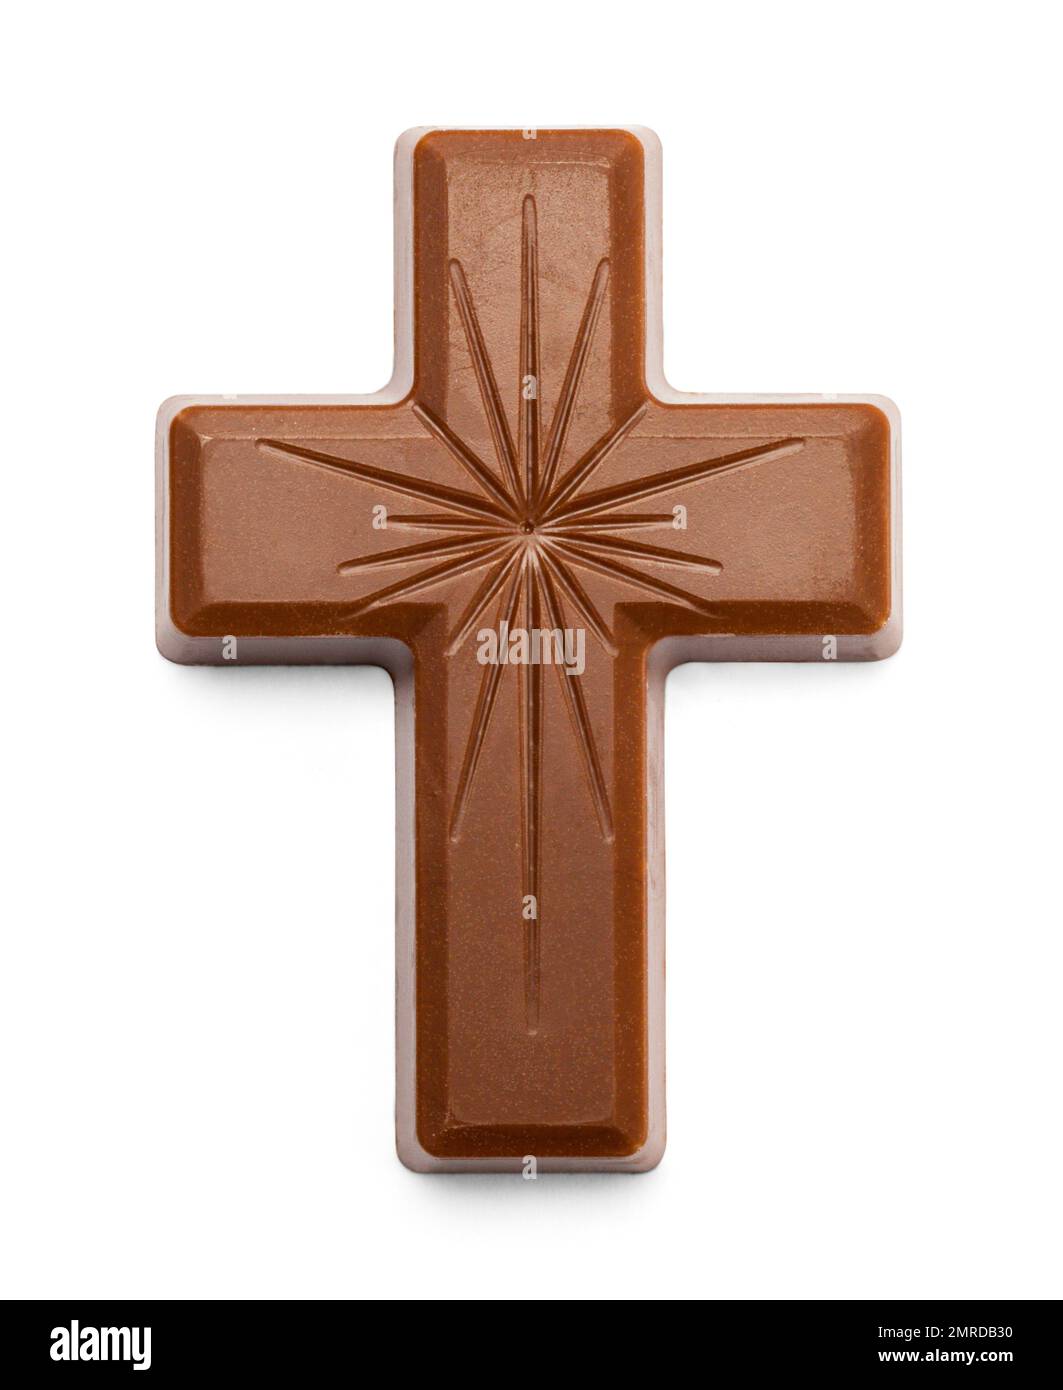 Small Chocolate Cross Cut Out on White. Stock Photo